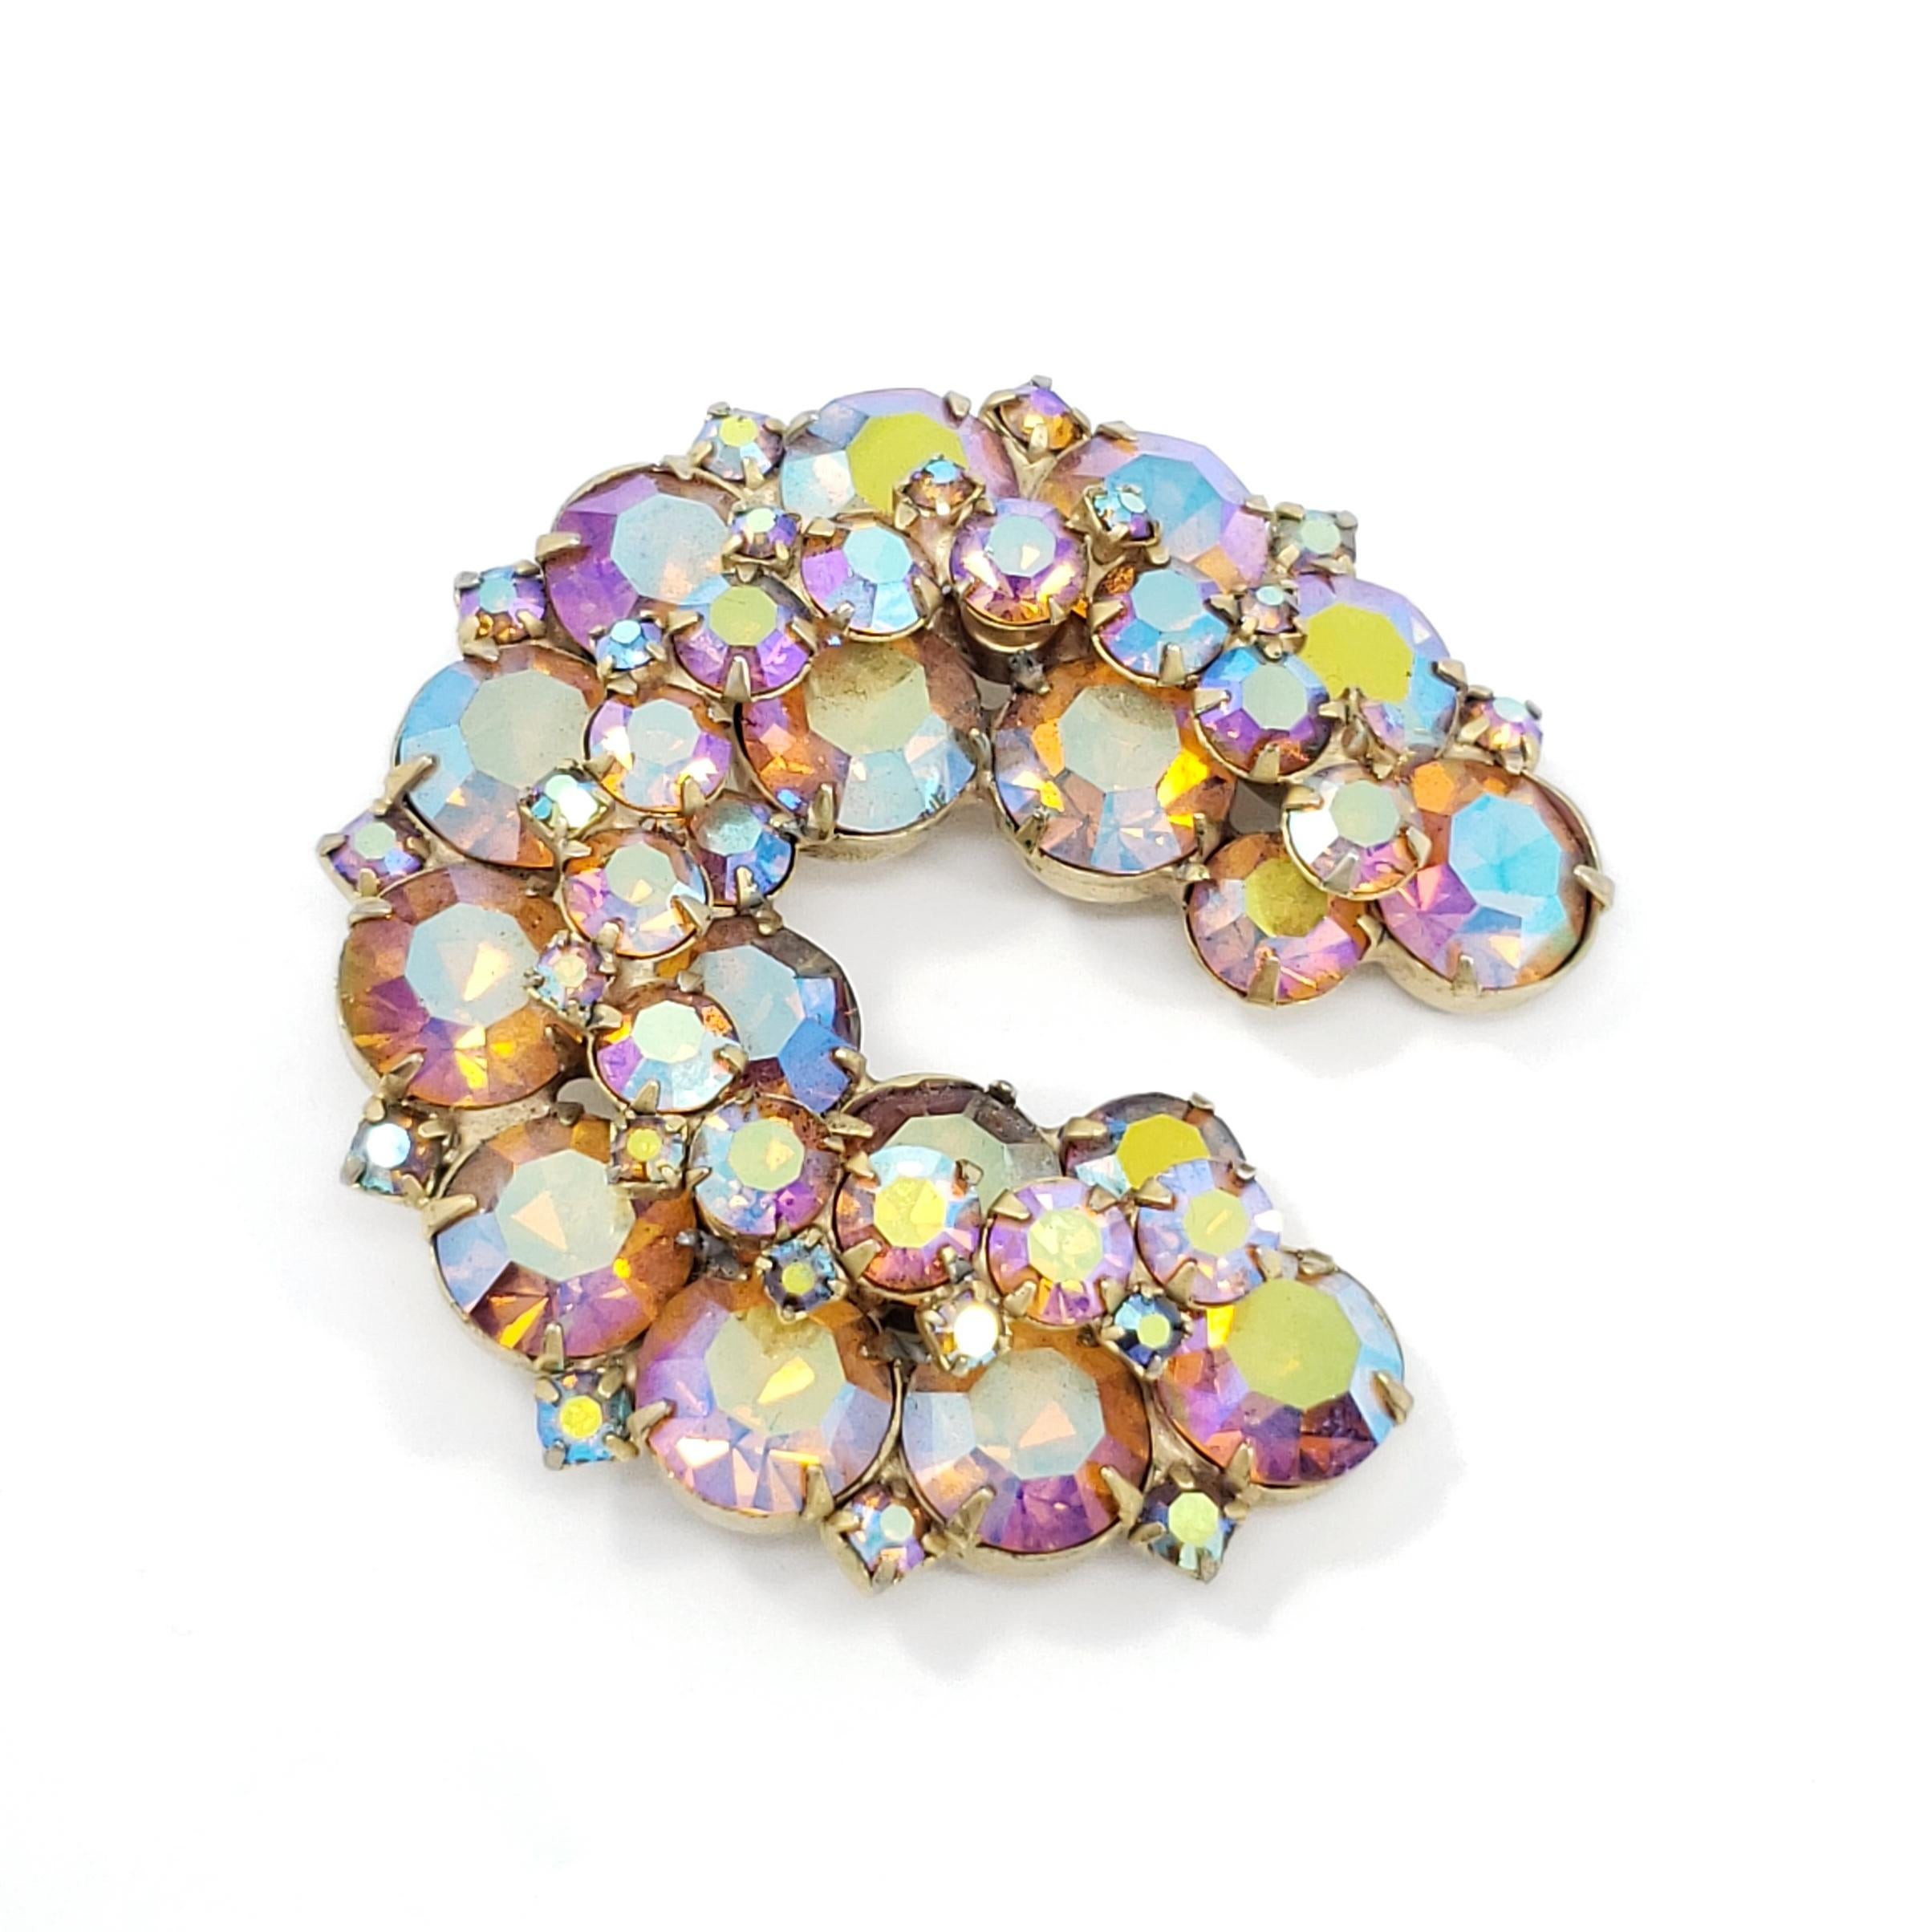 A stylish open round retro brooch. This accessory features sparkling, fuchsia, aurora borealis crystals. Prong-set in a vintage, wreath-shaped, brass-tone setting.